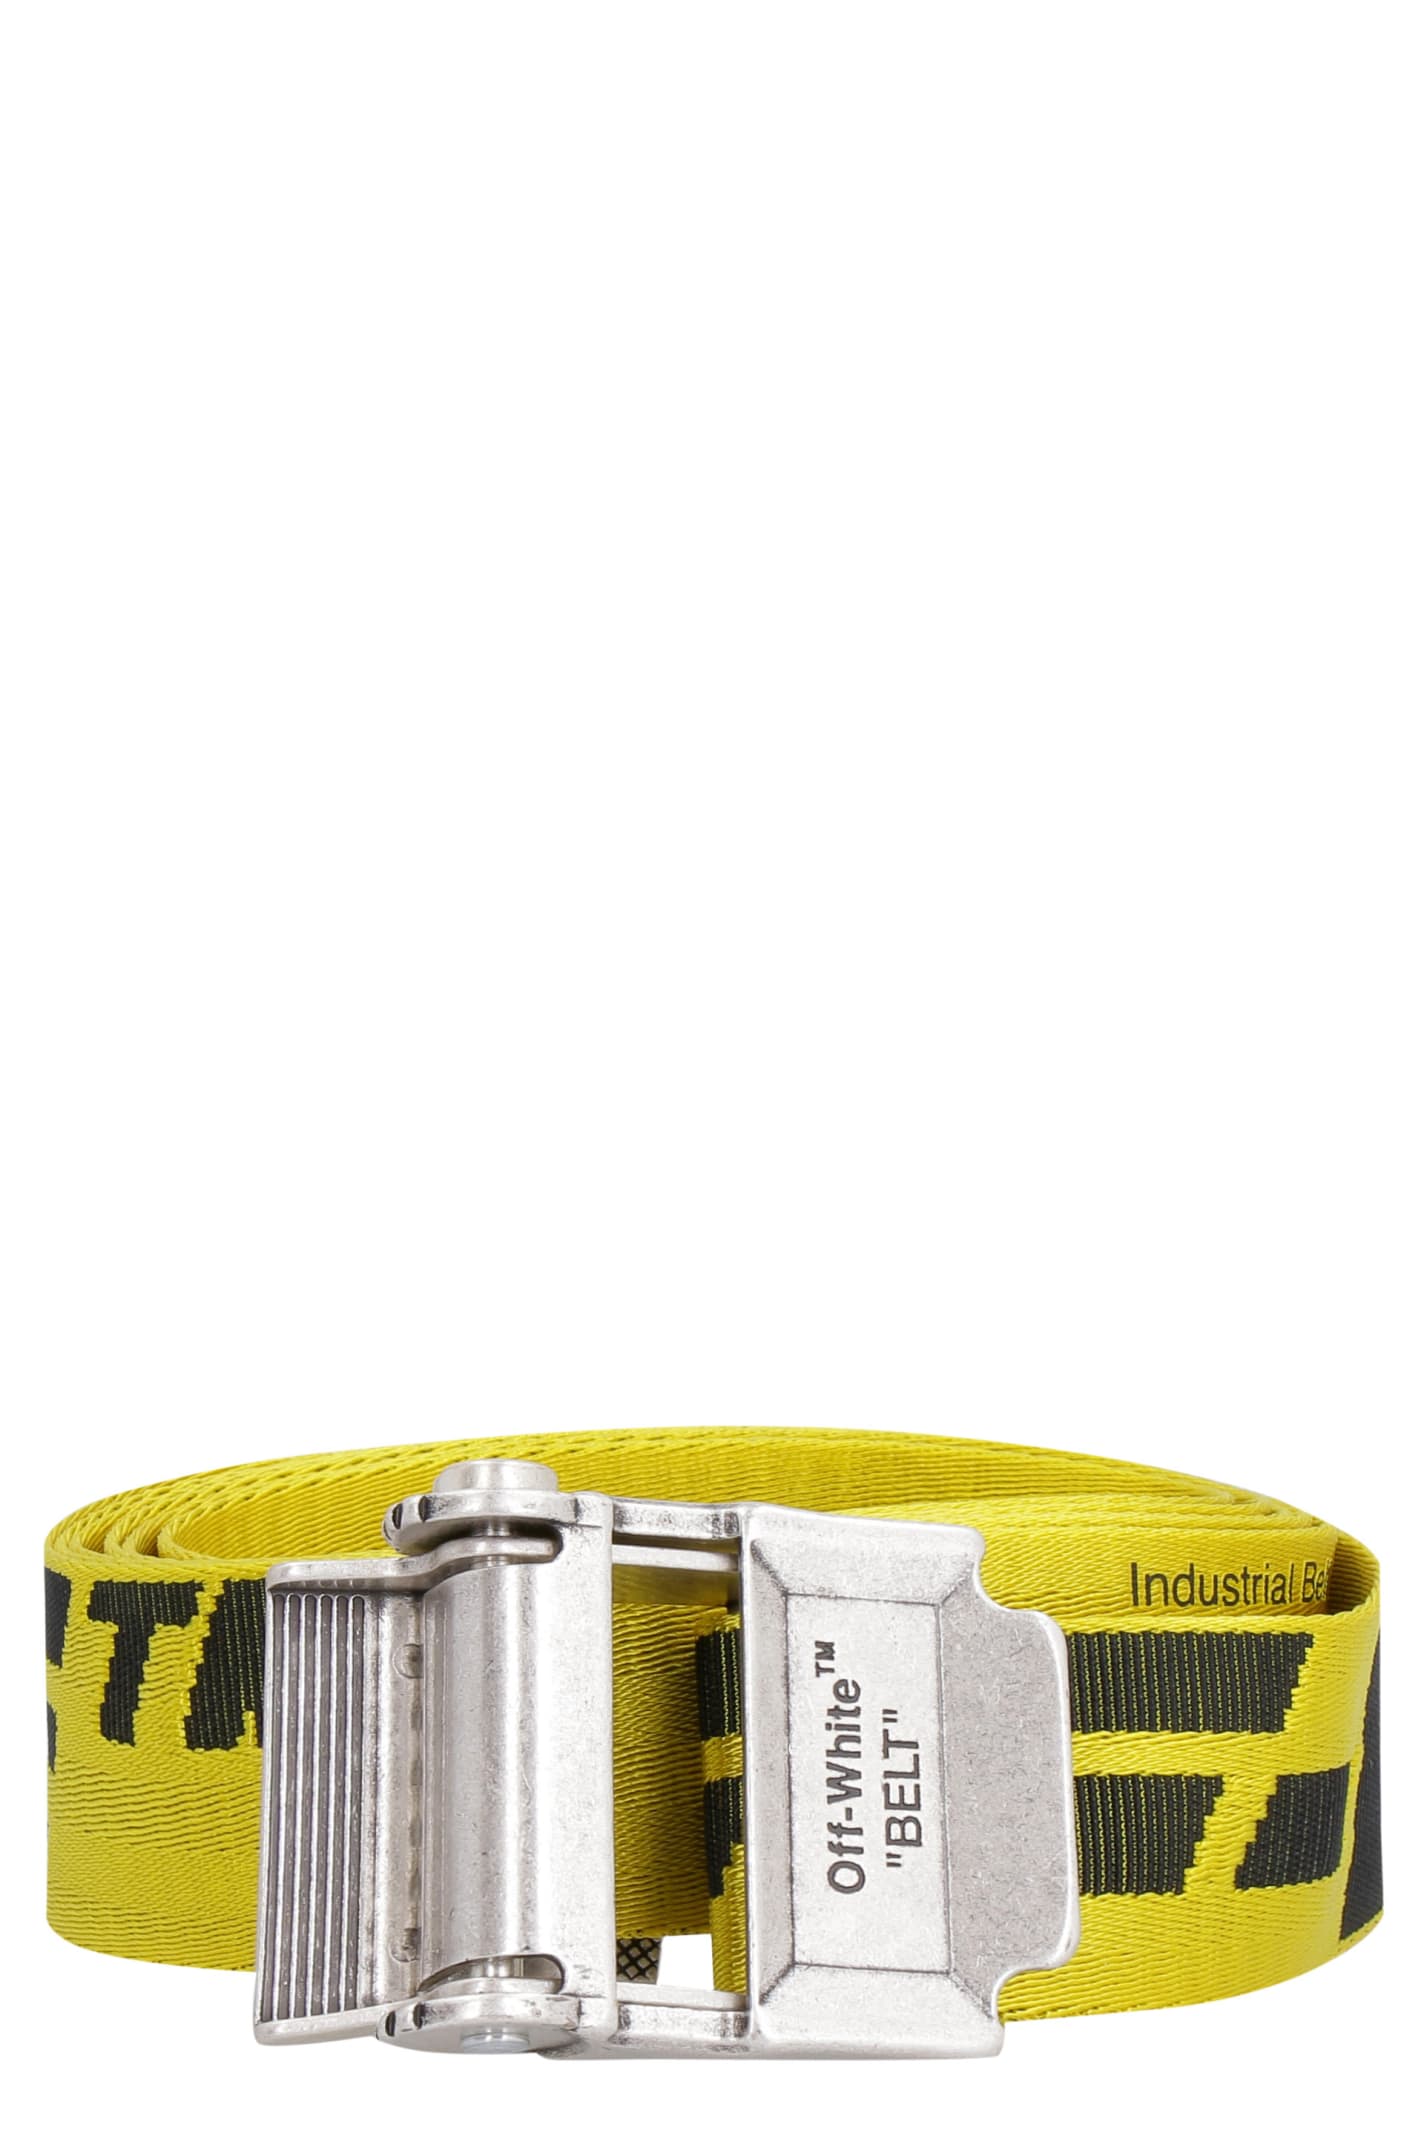 OFF-WHITE INDUSTRIAL CANVAS BELT,OMRB034R20F42035 6010